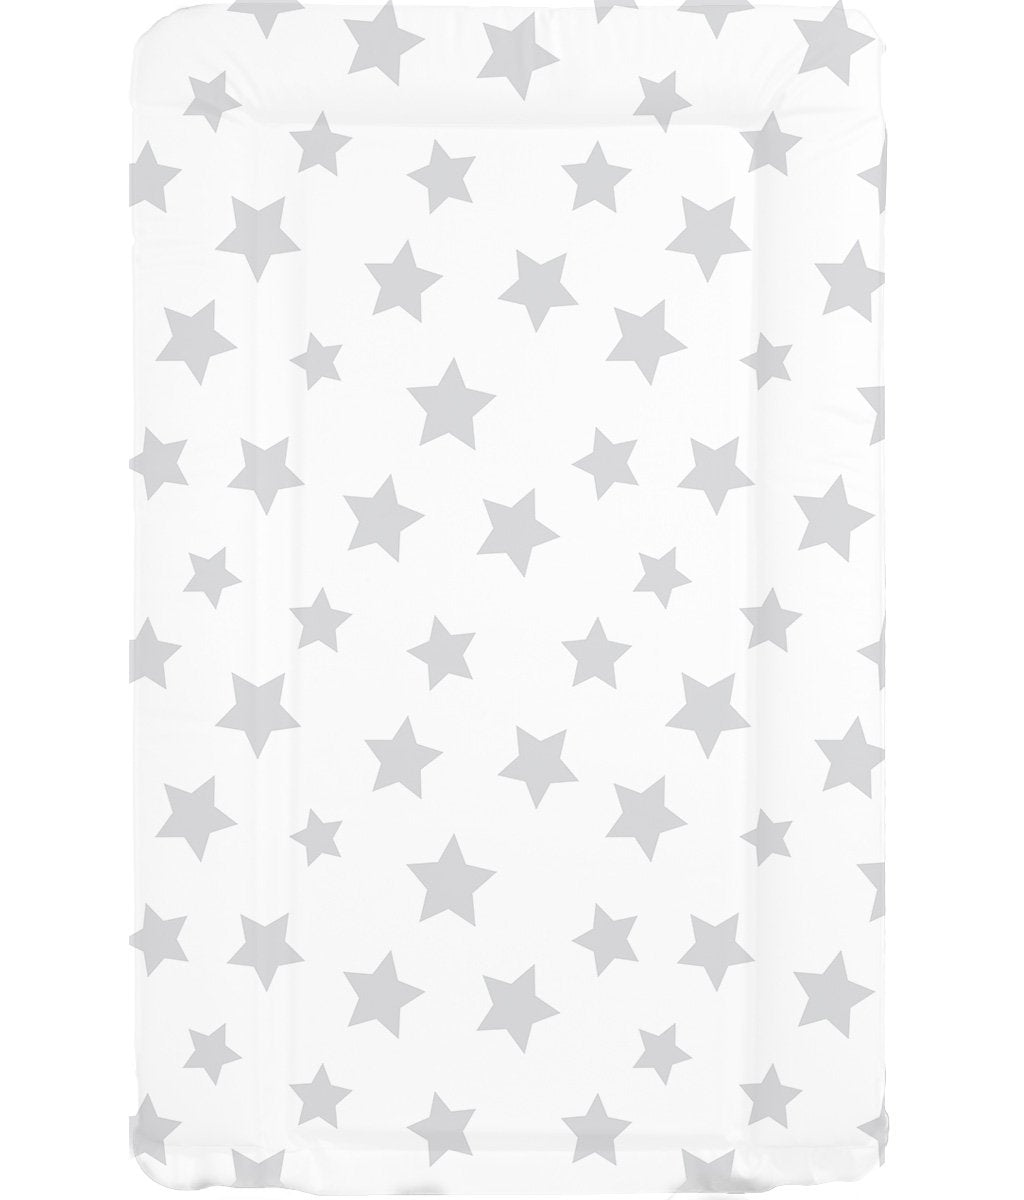 Deluxe Unisex Baby Waterproof Changing Mat with Raised Edges - Unique White with Grey Stars Design